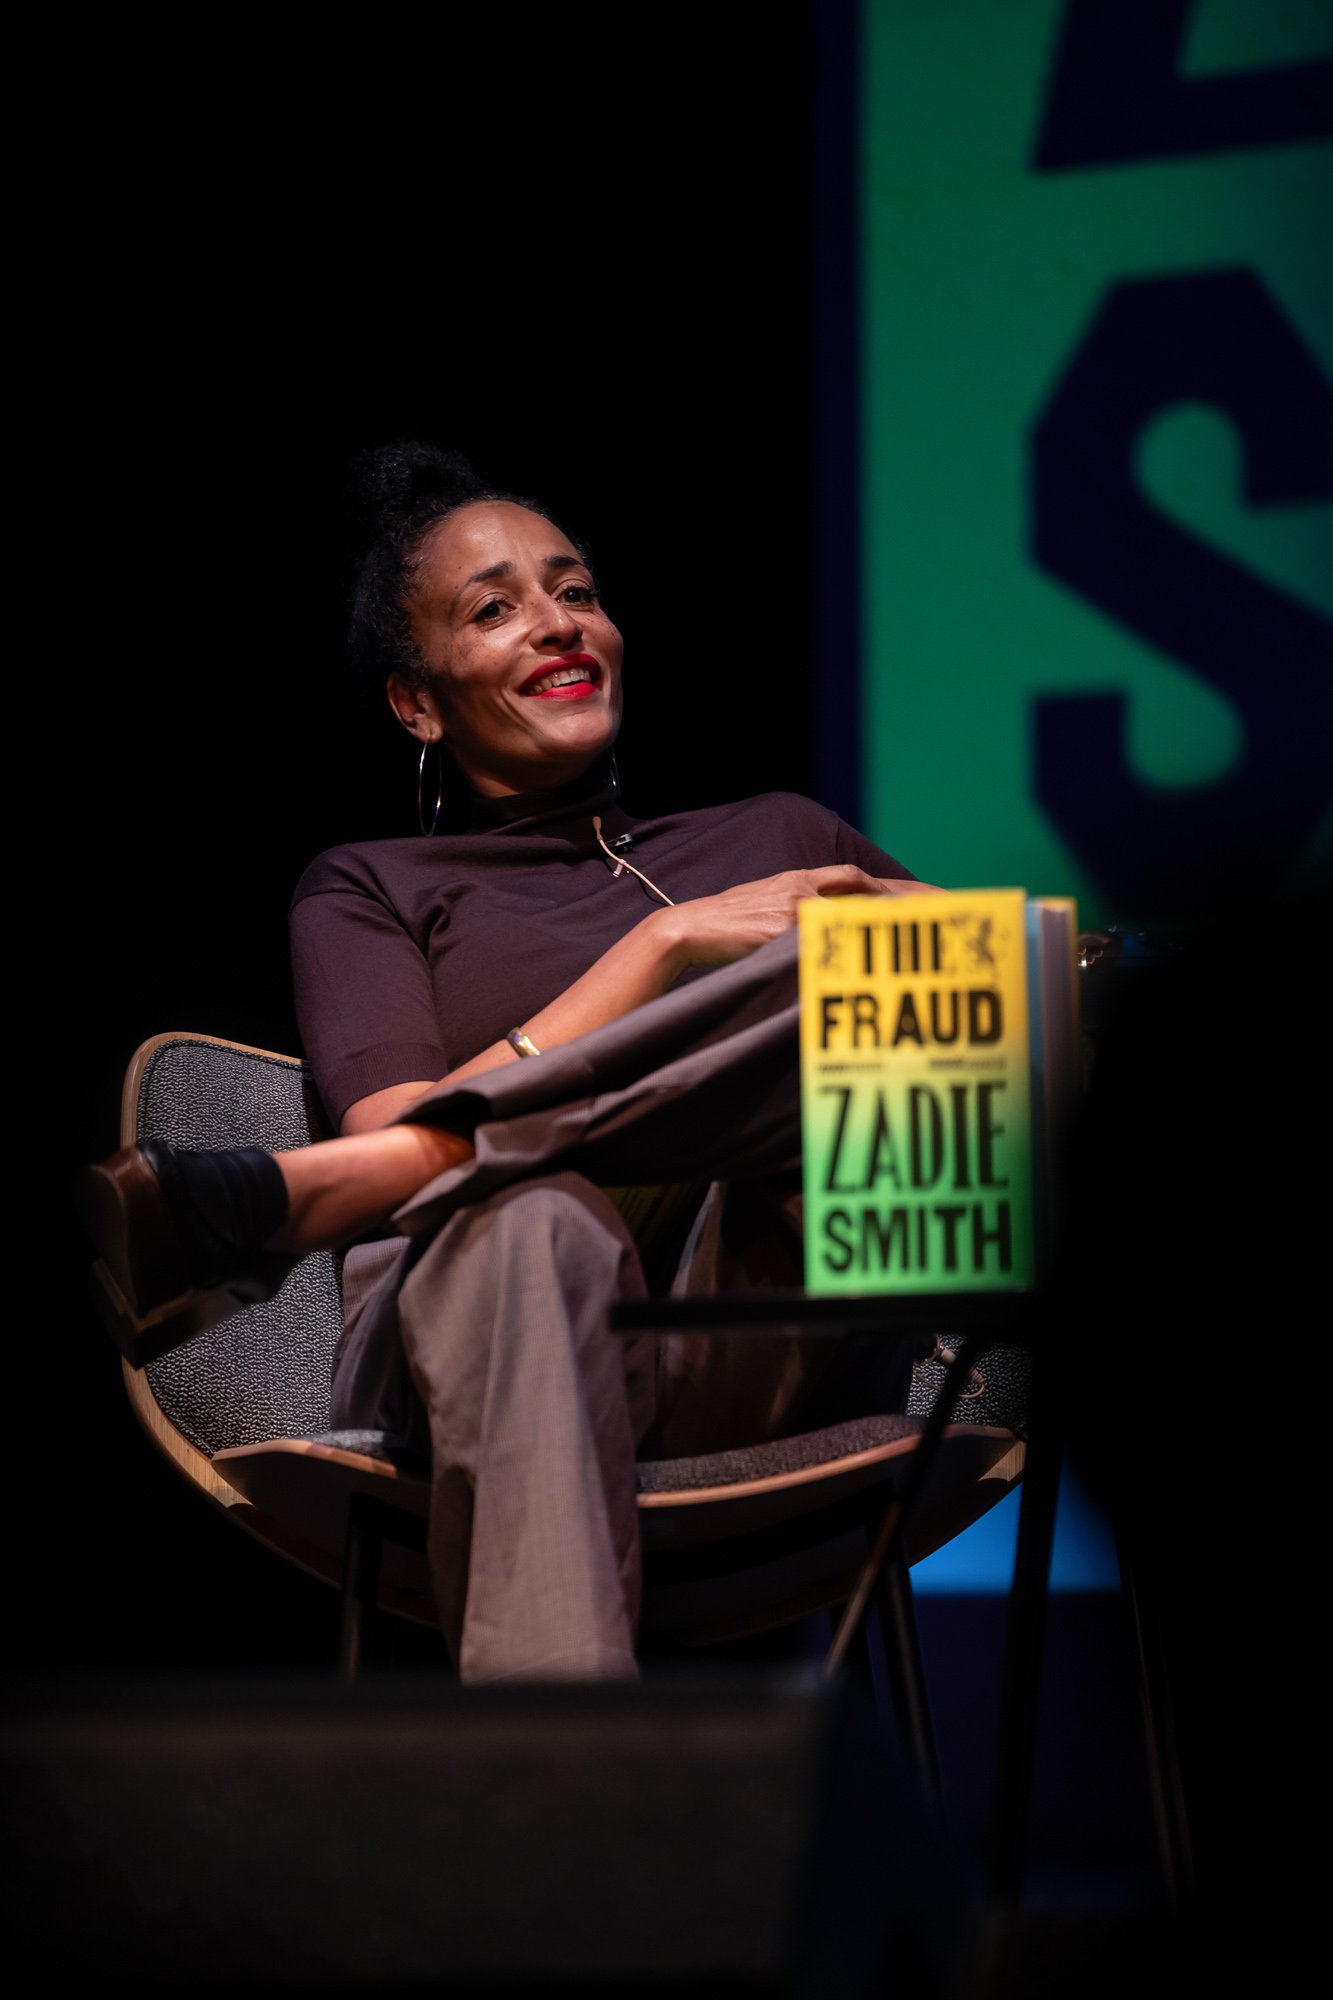 Author Zadie Smith at The Manchester Literature Festival 2023-5.jpg